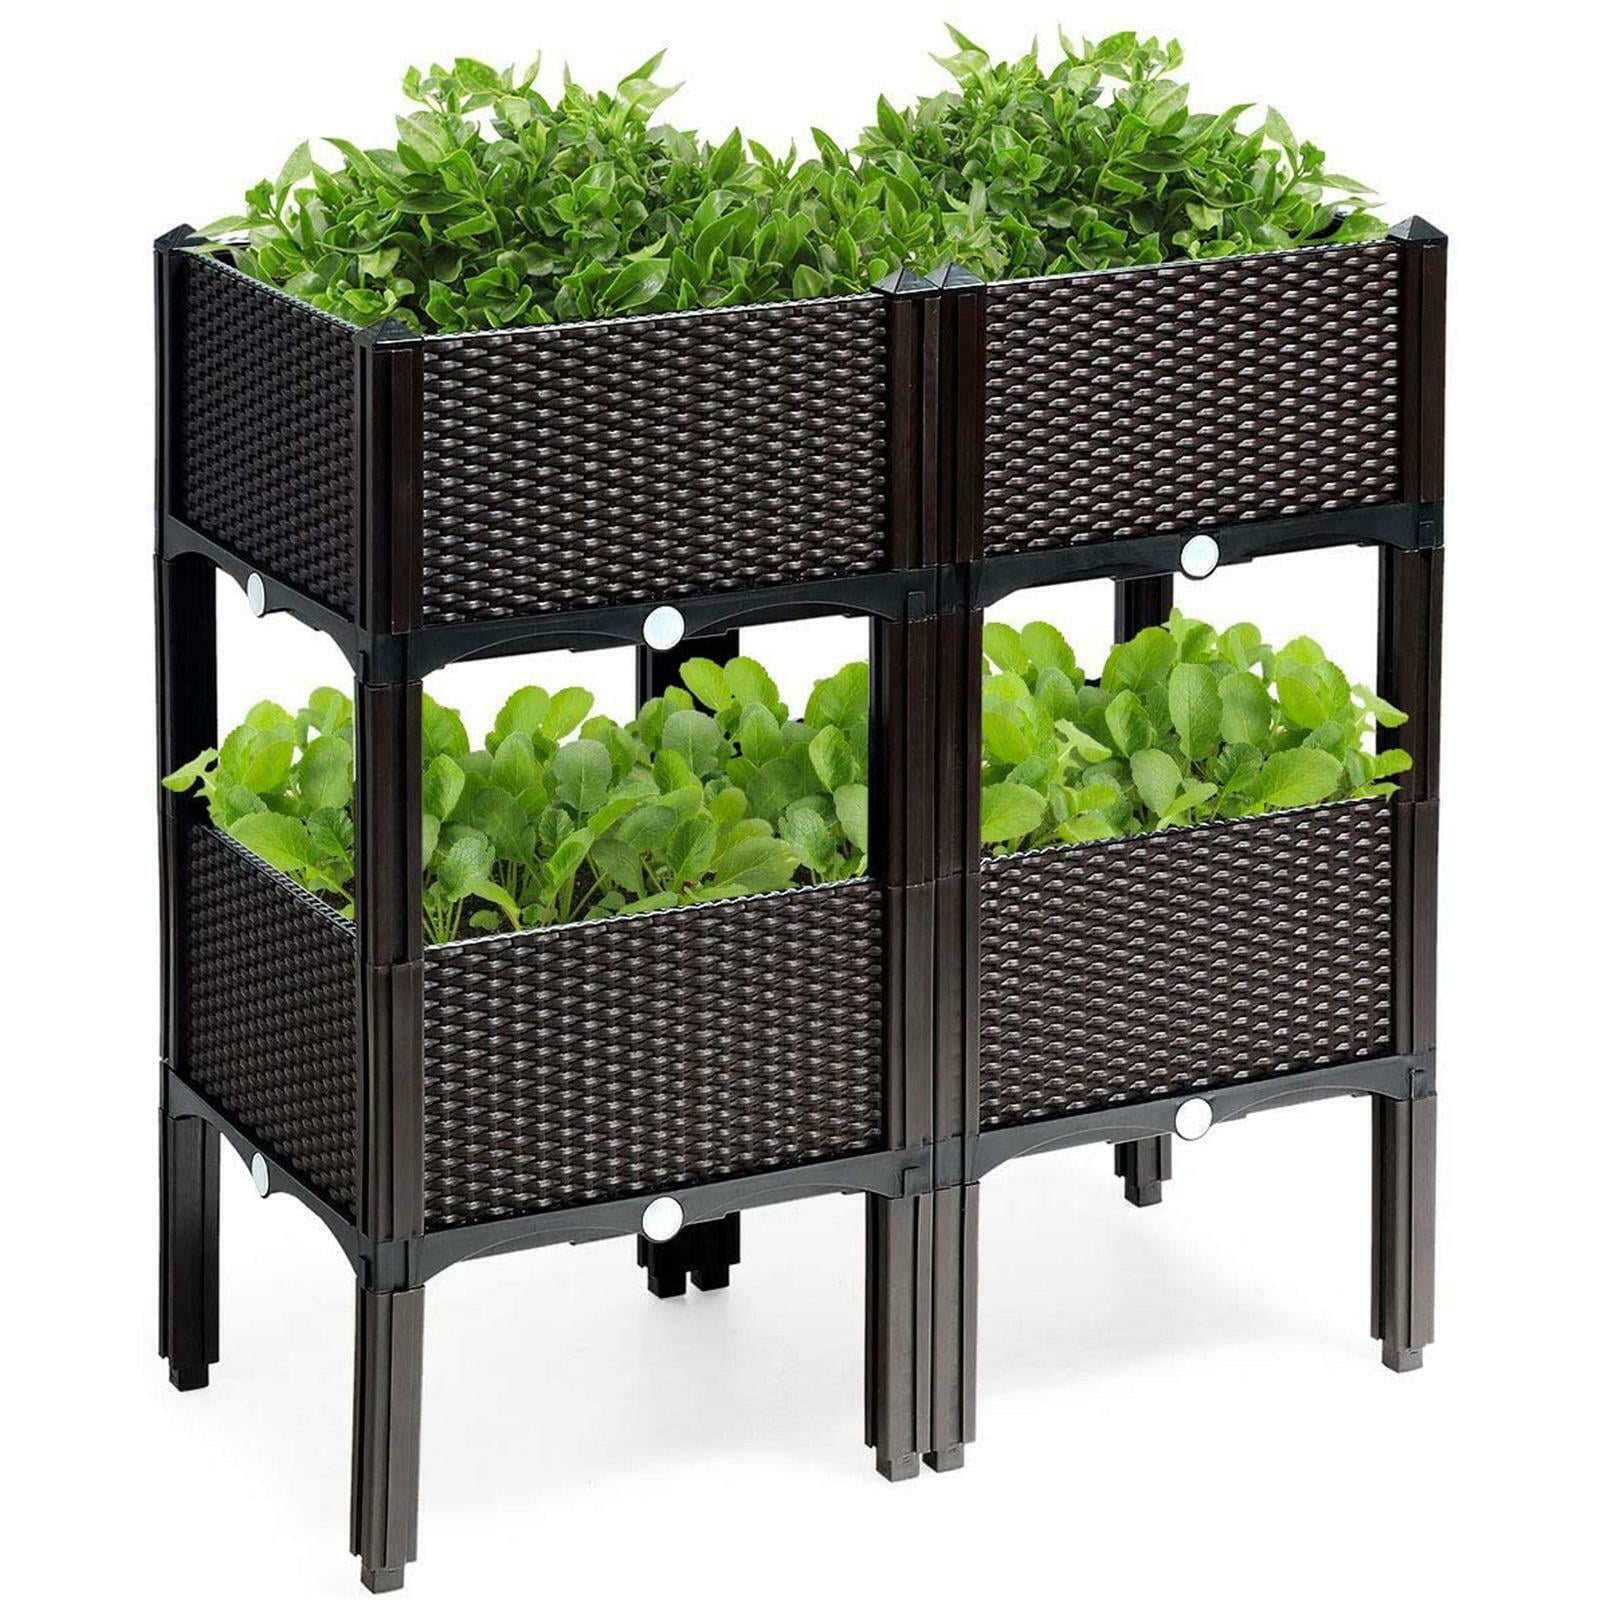 Details about   1/4X Raised Garden Bed Elevated Flower Vegetable Seed Grow Planter Box Stand 